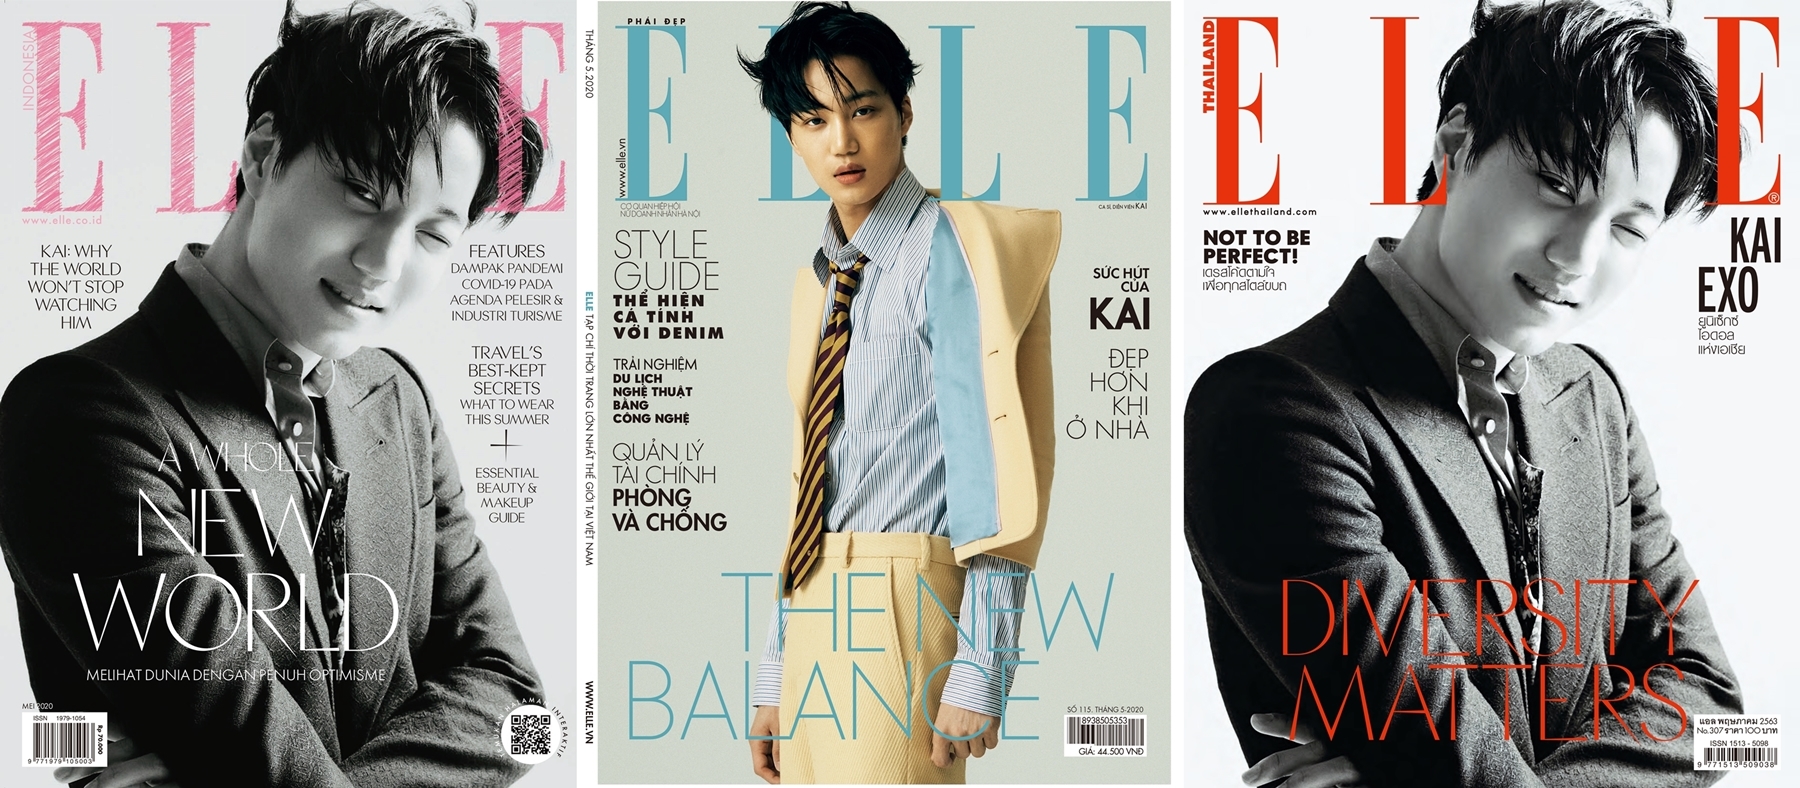 EXO Kai (a member of SM Entertainment) once again proved its unique influence in the fashion world.Kai has been selected as a cover model for the April issue of the fashion magazine Elle Korea, and has been attracting attention by simultaneously covering the May issue of Elle in three countries: Indonesia, Thailand and Vietnam.In the public picture, Kai presents the 2020 spring/summer collection look with perfect fit and offers infinite charm from the face of fashion icon to the lovely atmosphere.Kai is a model of the Italian luxury brand Gucci, and has been selected as the first male global ambassador of Gucci eyewear for the second consecutive year, and is the only K-POP artist to be named as the 2020 Best Dresser Men by British fashion magazine GQ.In particular, Elle Indonesia said, Koreas superstar Kai, who leads the trend, has decorated the cover of Elle Indonesia.When Kai made the cover in 2018, it sold out in two days, the first time in the history of Elle Indonesia.The May issue has already sold out and is very surprised by its popularity. Meanwhile, Kai also acted as a member of the Allied Team SuperM, which includes seven members including Shiny Taemin, EXO Baekhyun, Taeyong and Mark of NCT 127, and Chinese group WayV Lucas and Ten as EXOs, participated in the worlds first online paid concert Beyond LIVE (Beyond Live), participated in fantastic performances and intimate communication with fans around the world. I got a hot reaction.iMBC Baek A-young  Photos SM